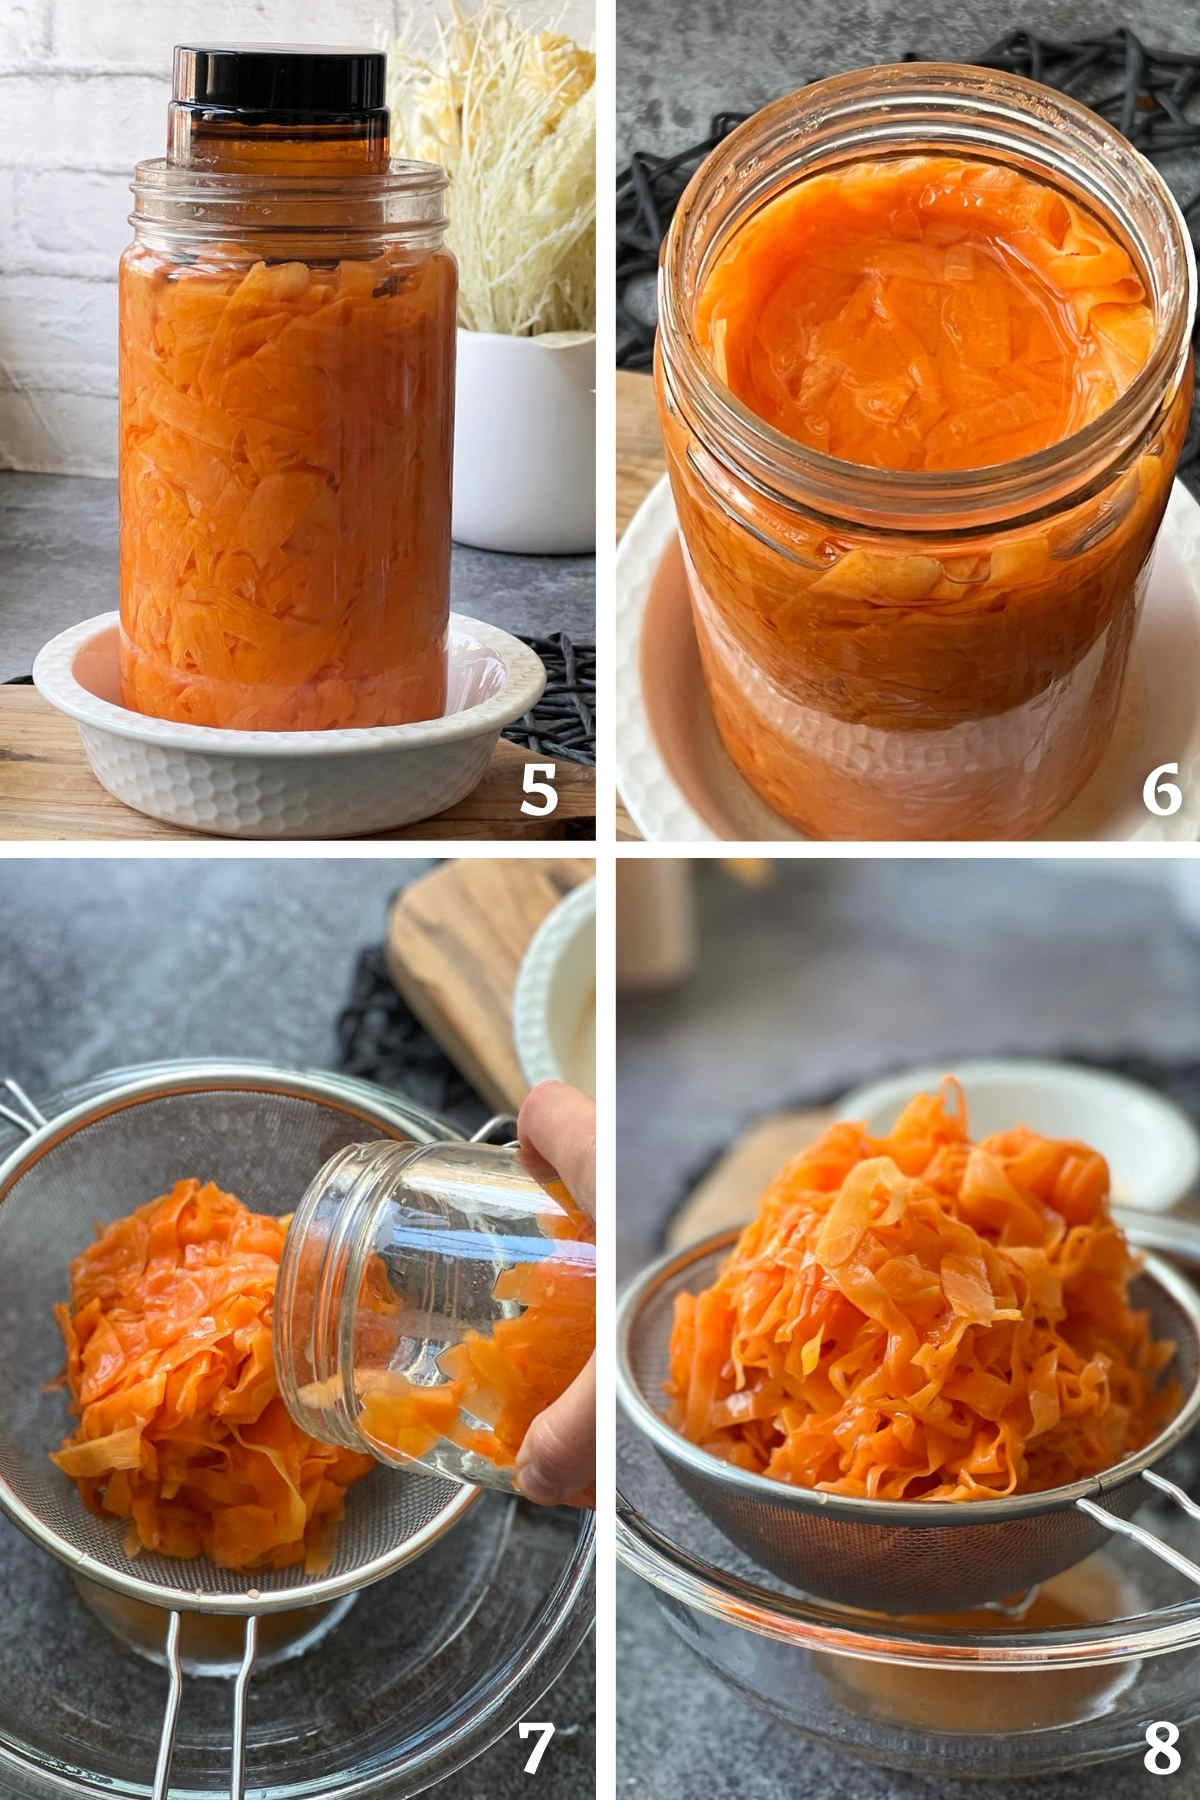 Process shots showing how to prepare the fermented carrots for assembling the salad, by removing the brine.